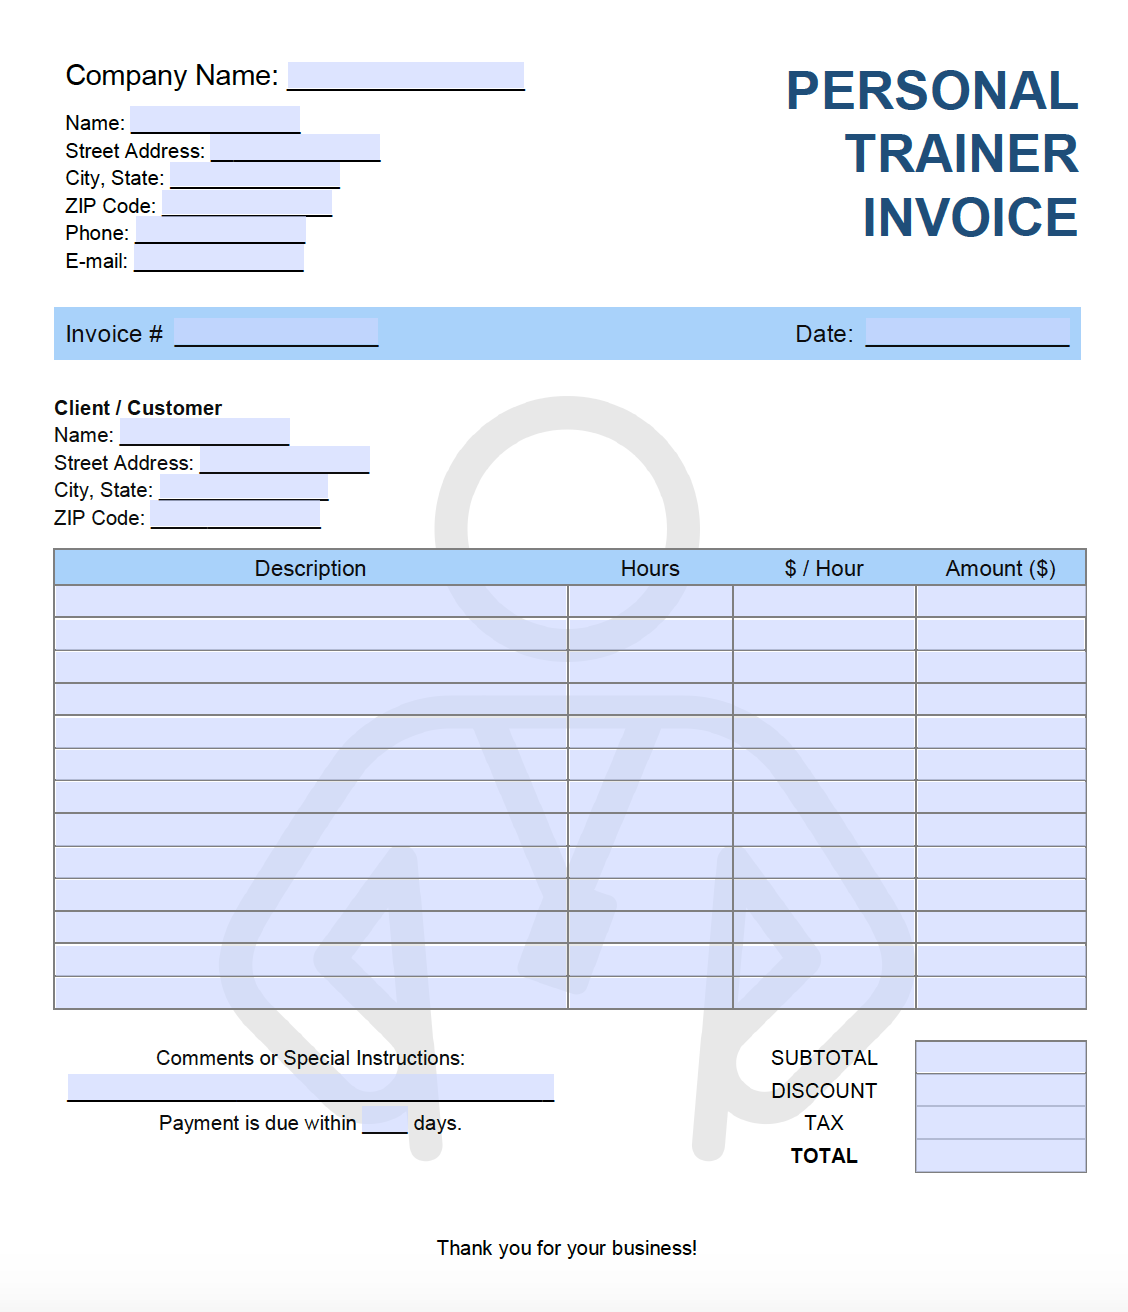 Free Personal Trainer Invoice Template PDF WORD EXCEL